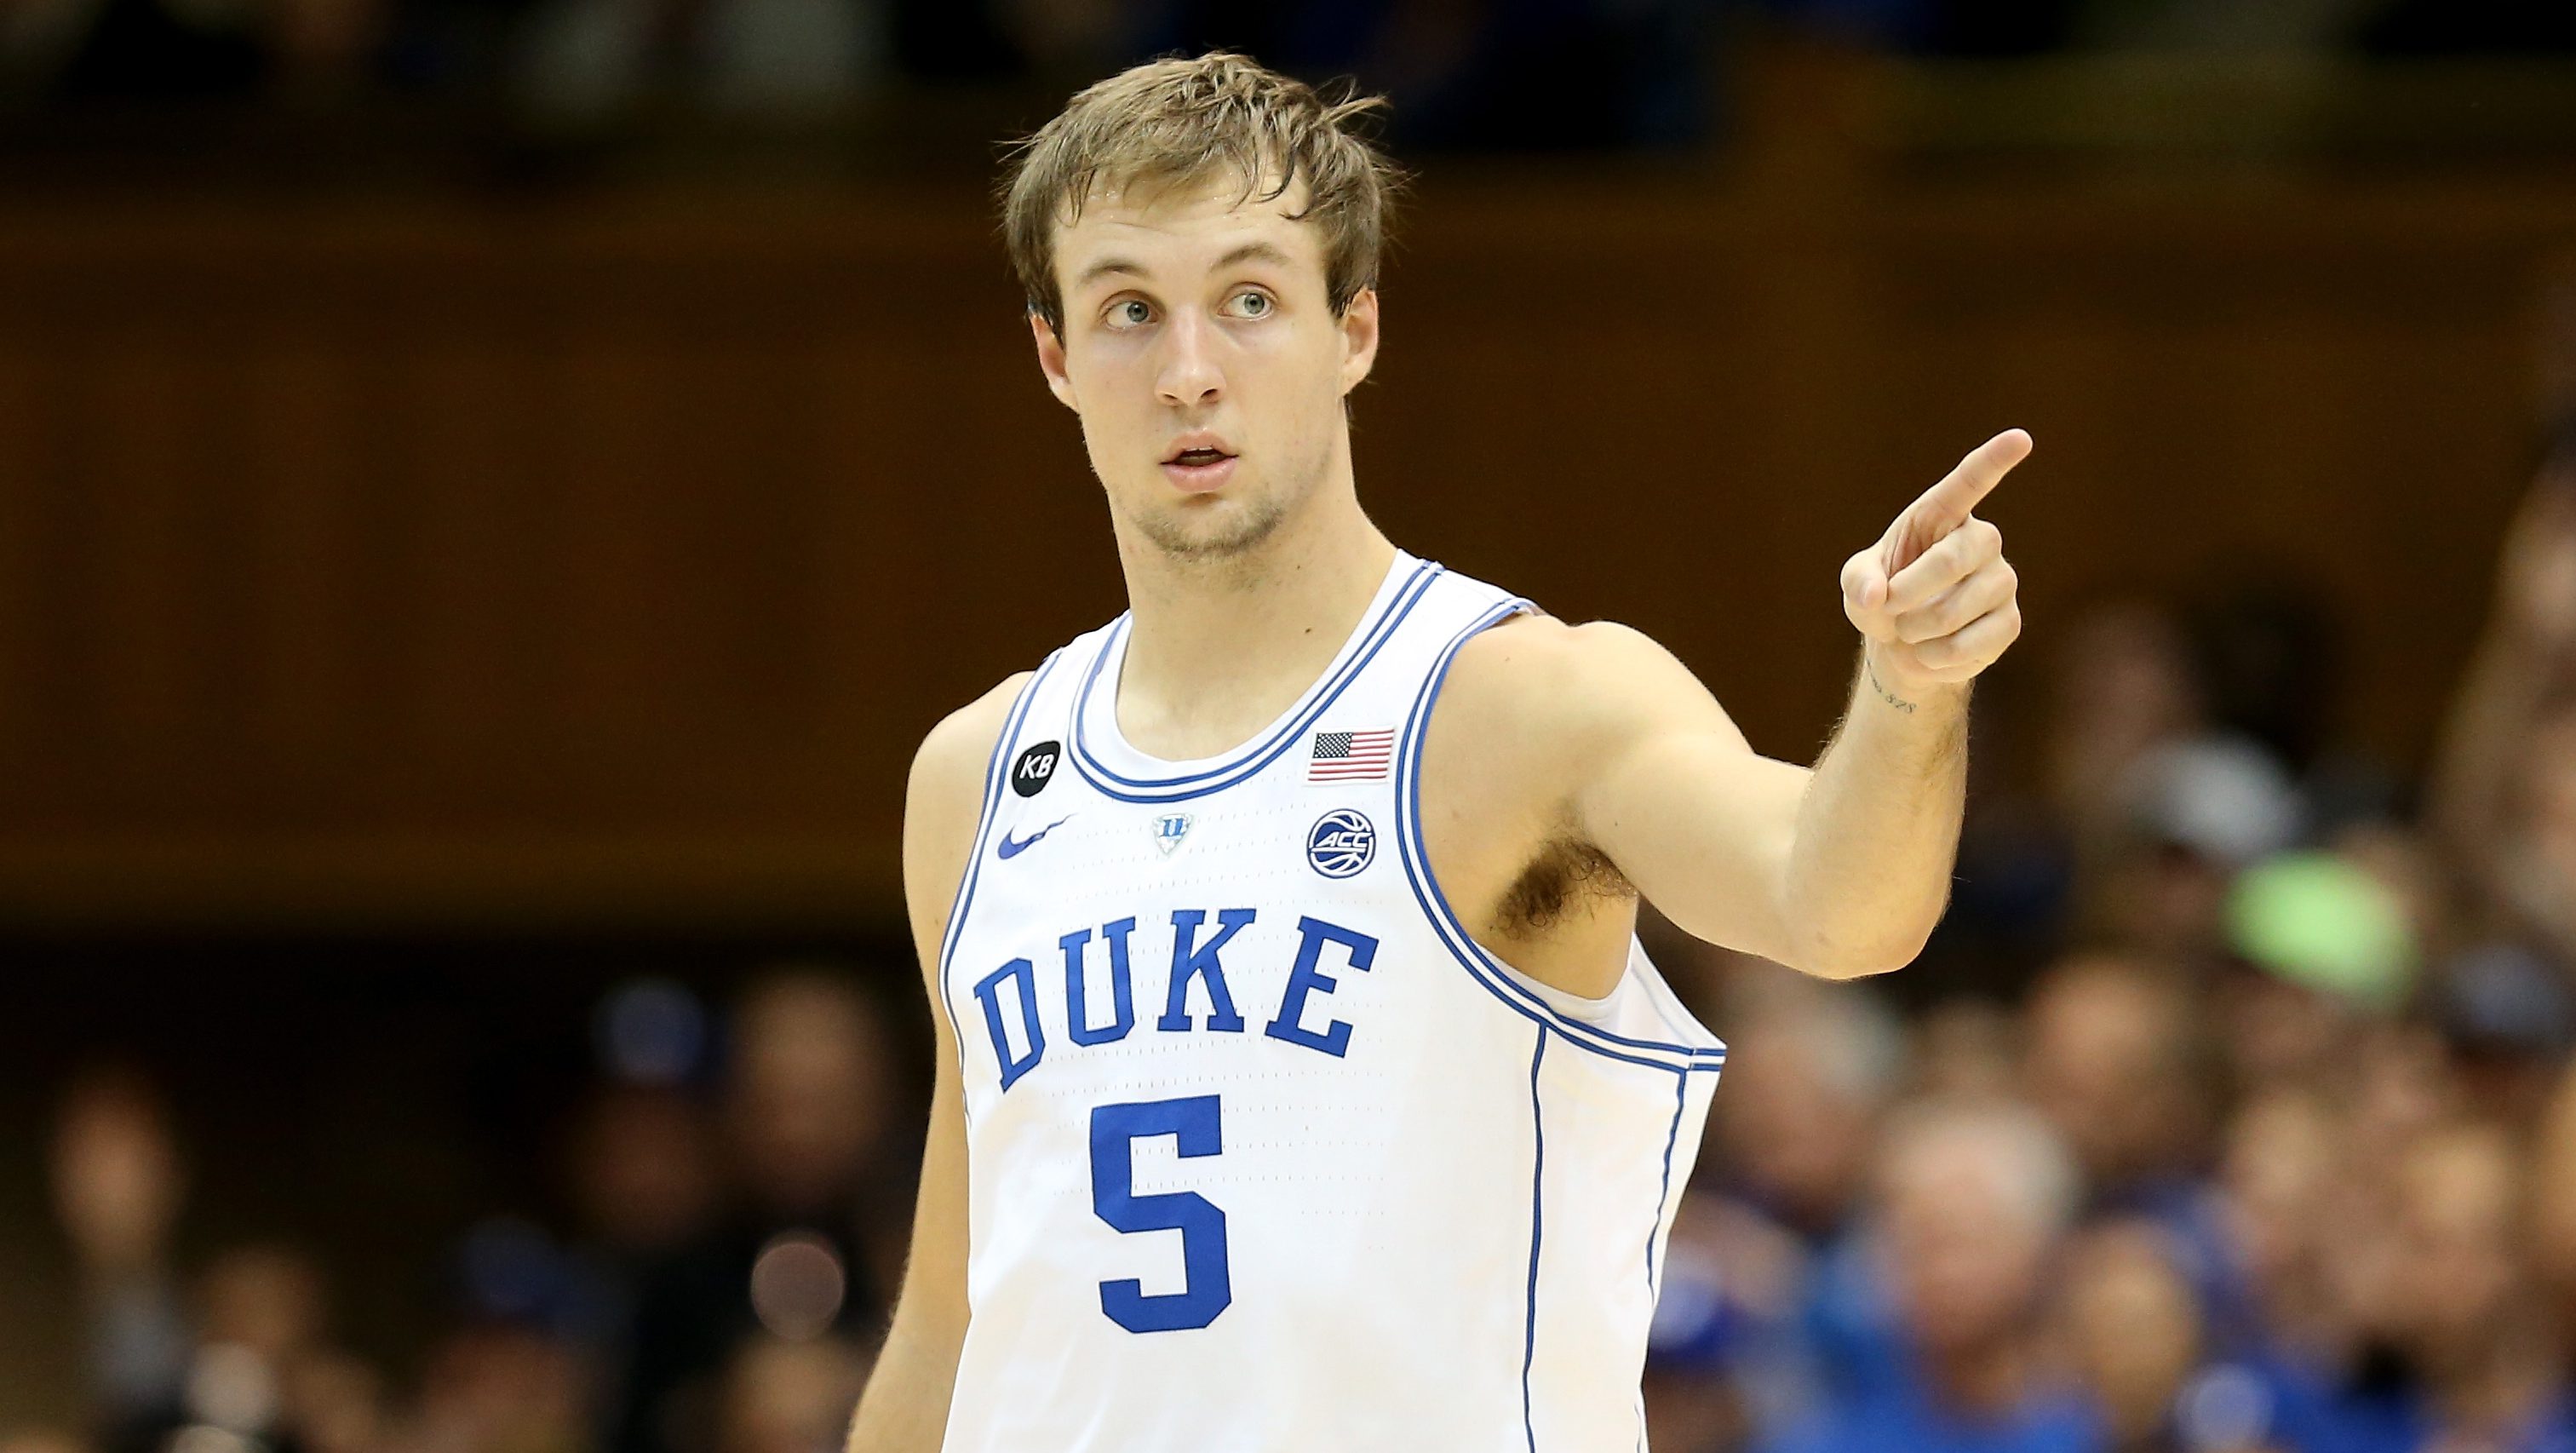 DURHAM, NC - DECEMBER 19: Luke Kennard #5 of the Duke Blue Devils reacts after a play against the Tennessee State Tigers during their game at Cameron Indoor Stadium on December 19, 2016 in Durham, North Carolina. (Photo by Streeter Lecka/Getty Images)